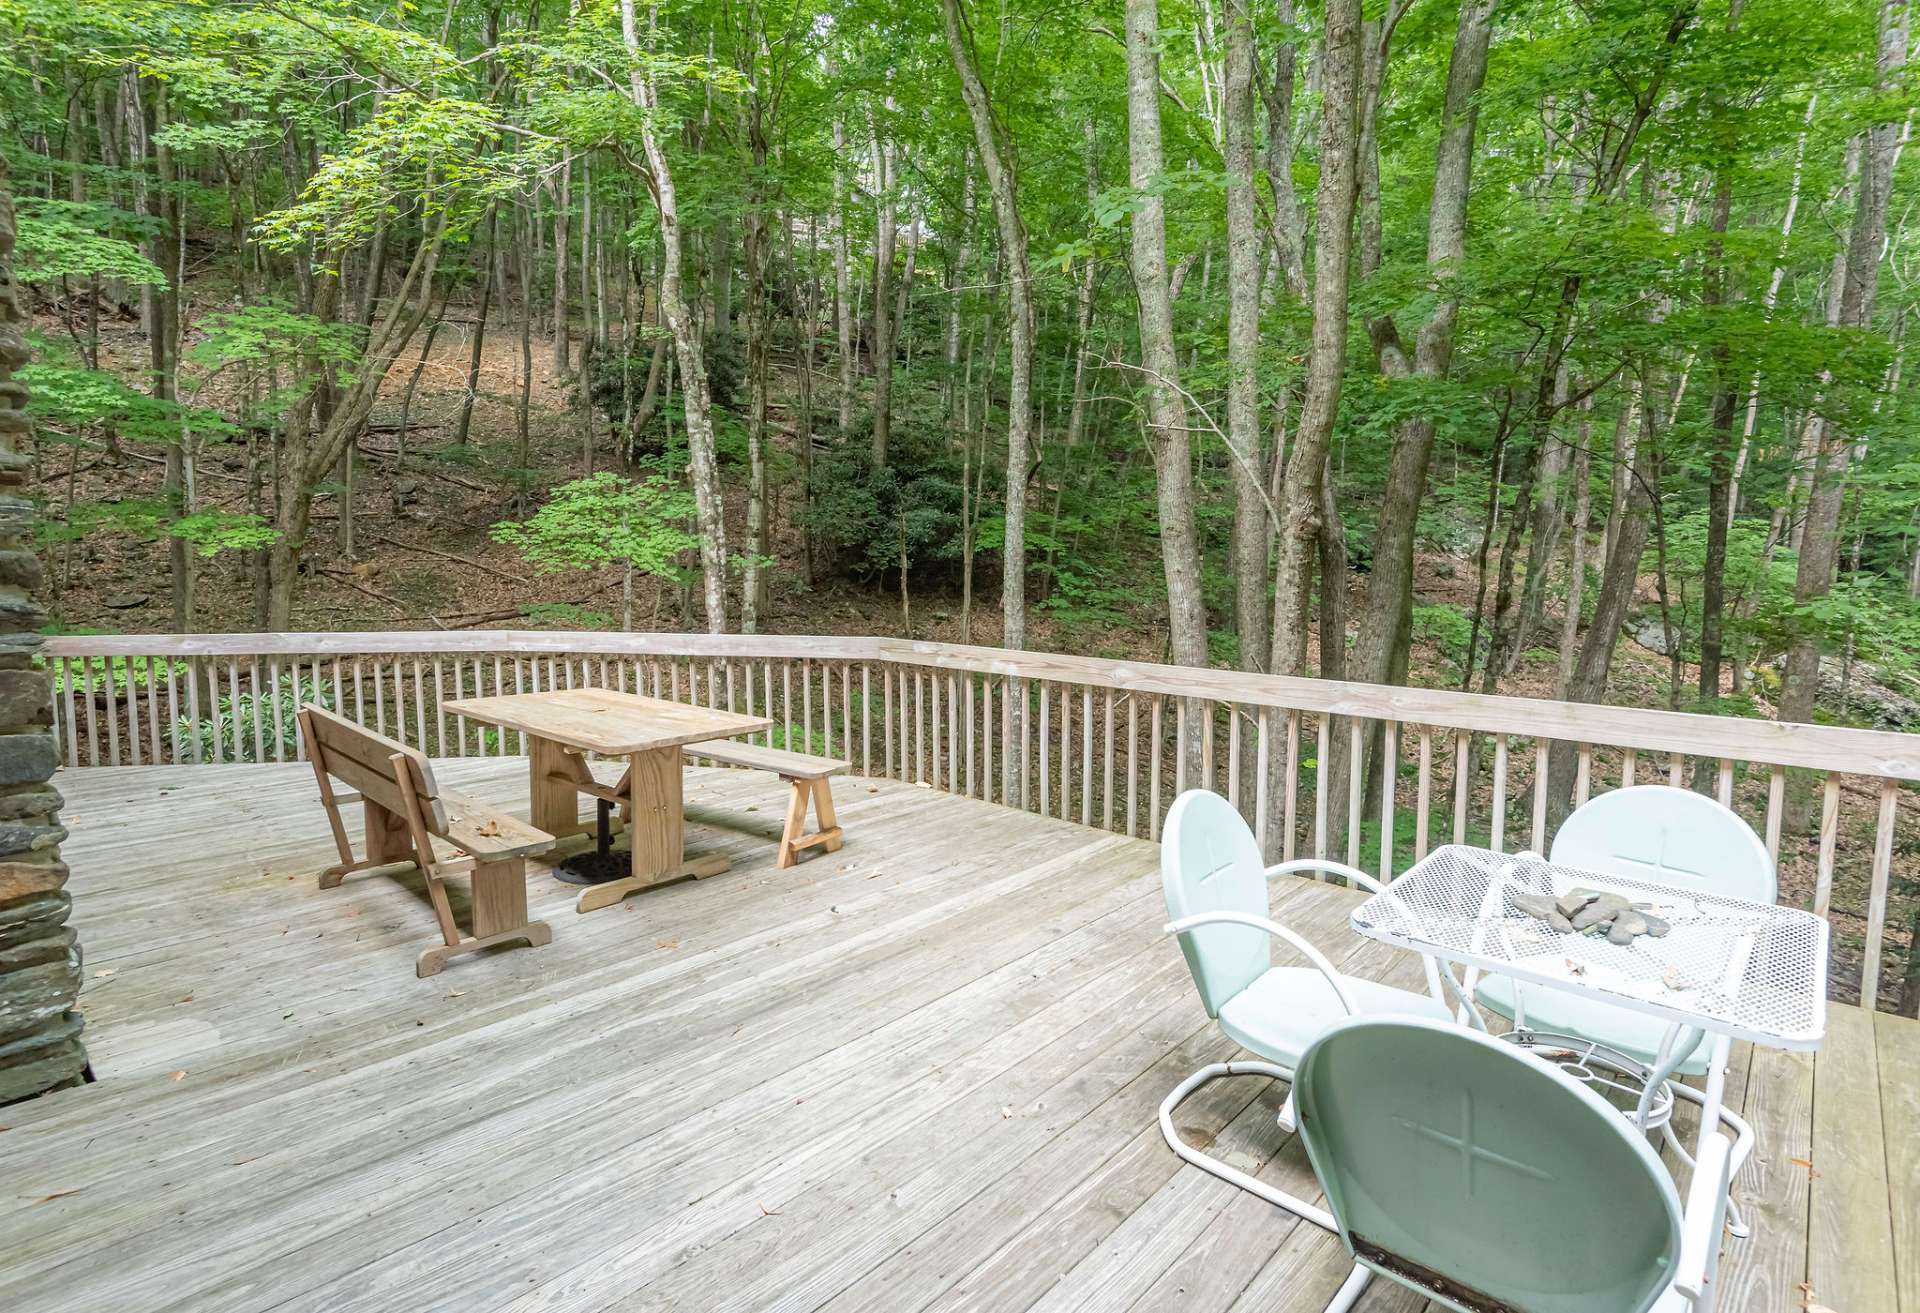 In addition to the covered front porch, this large open deck space provides lots of outdoor entertaining space.